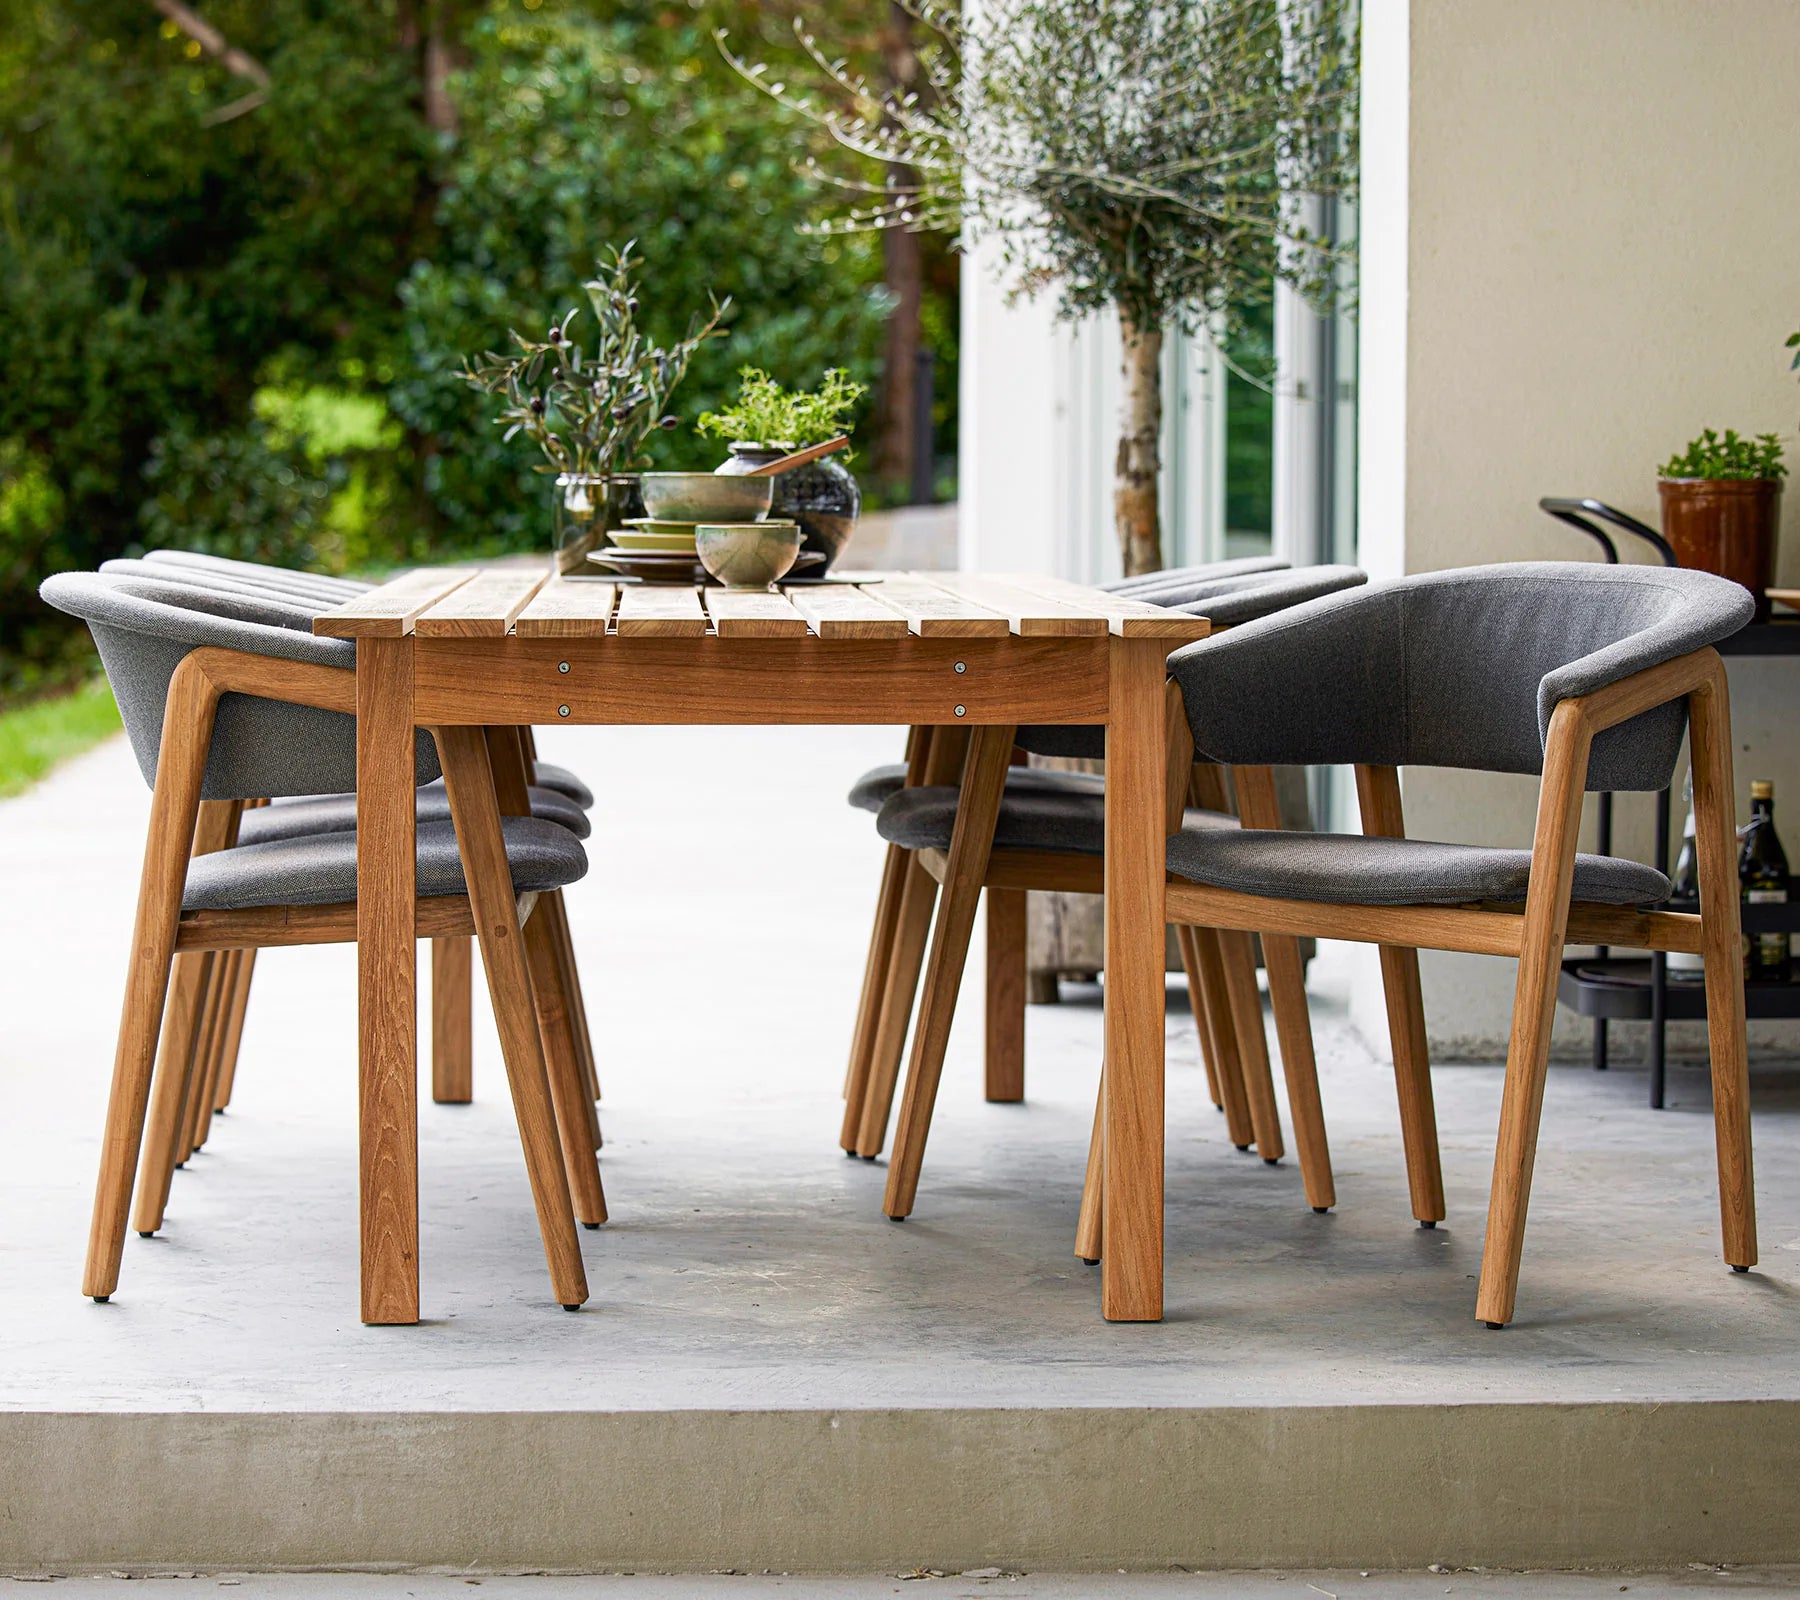 Boxhill's  Luna Outdoor Dining Armchair Lifestyle image with teak dining table